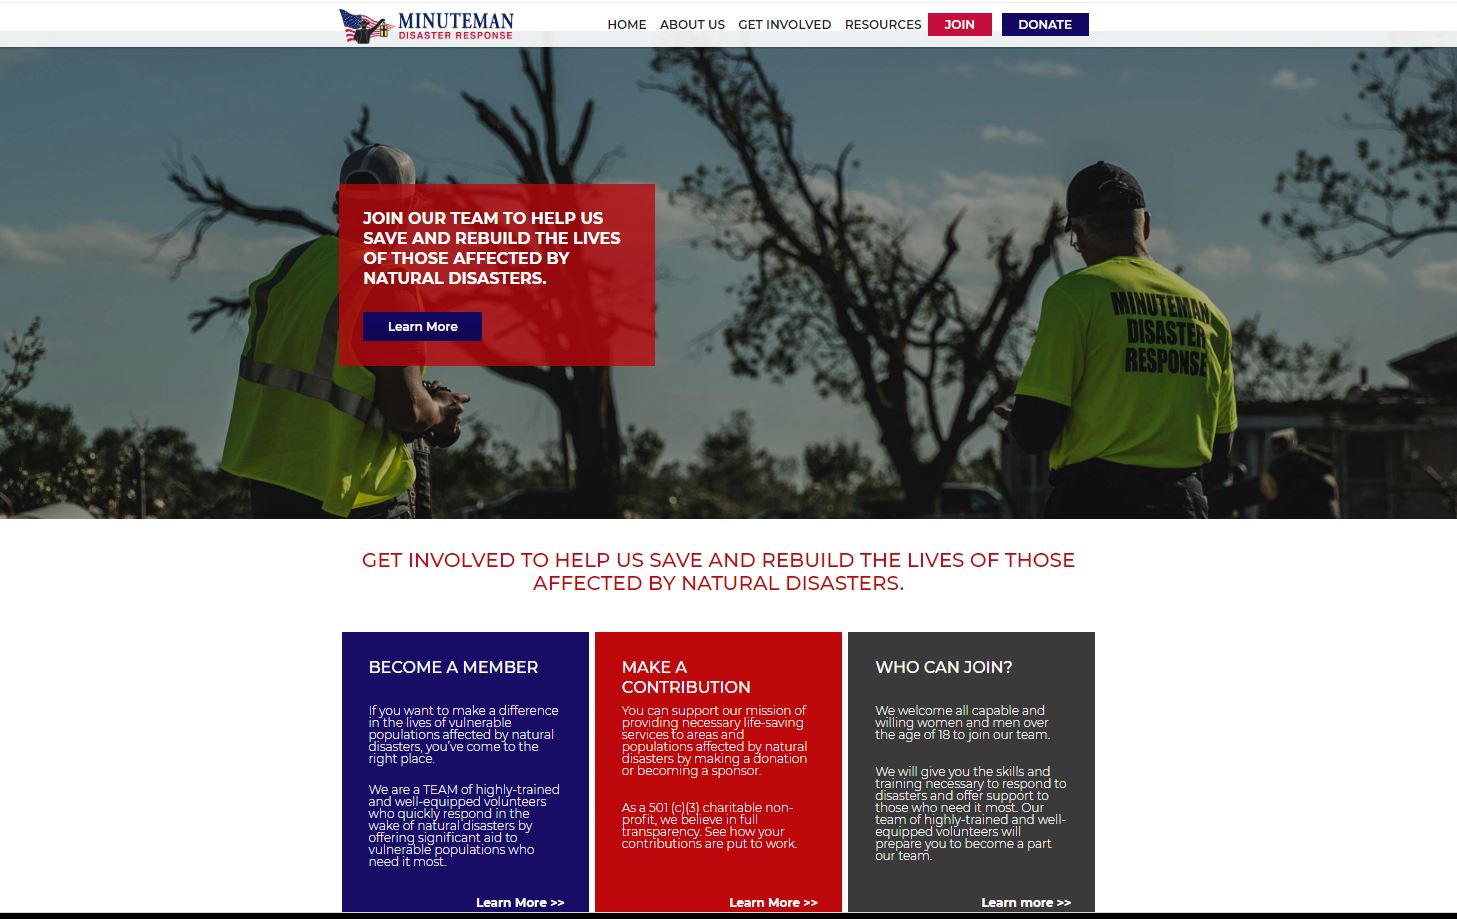 How Minuteman Disaster Response Receives More Donations Due to Their New Website